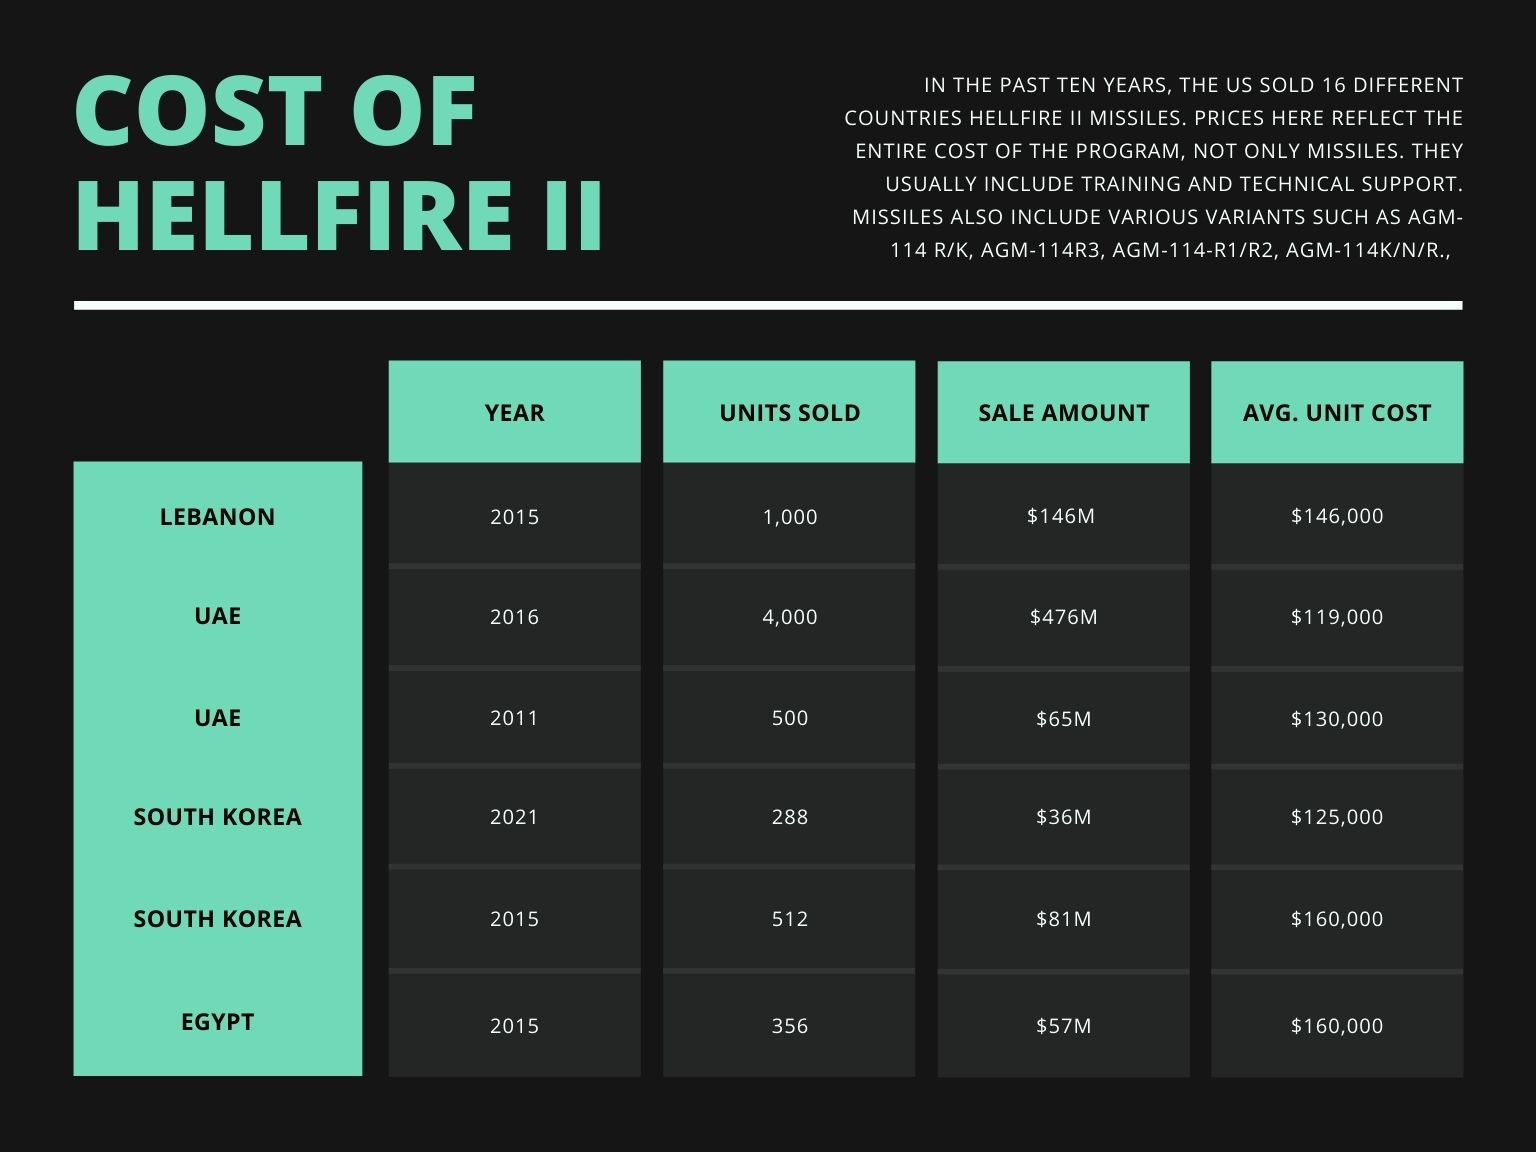 Chart showing cost of hellfire II missiles in various Middle-East and Asian countries